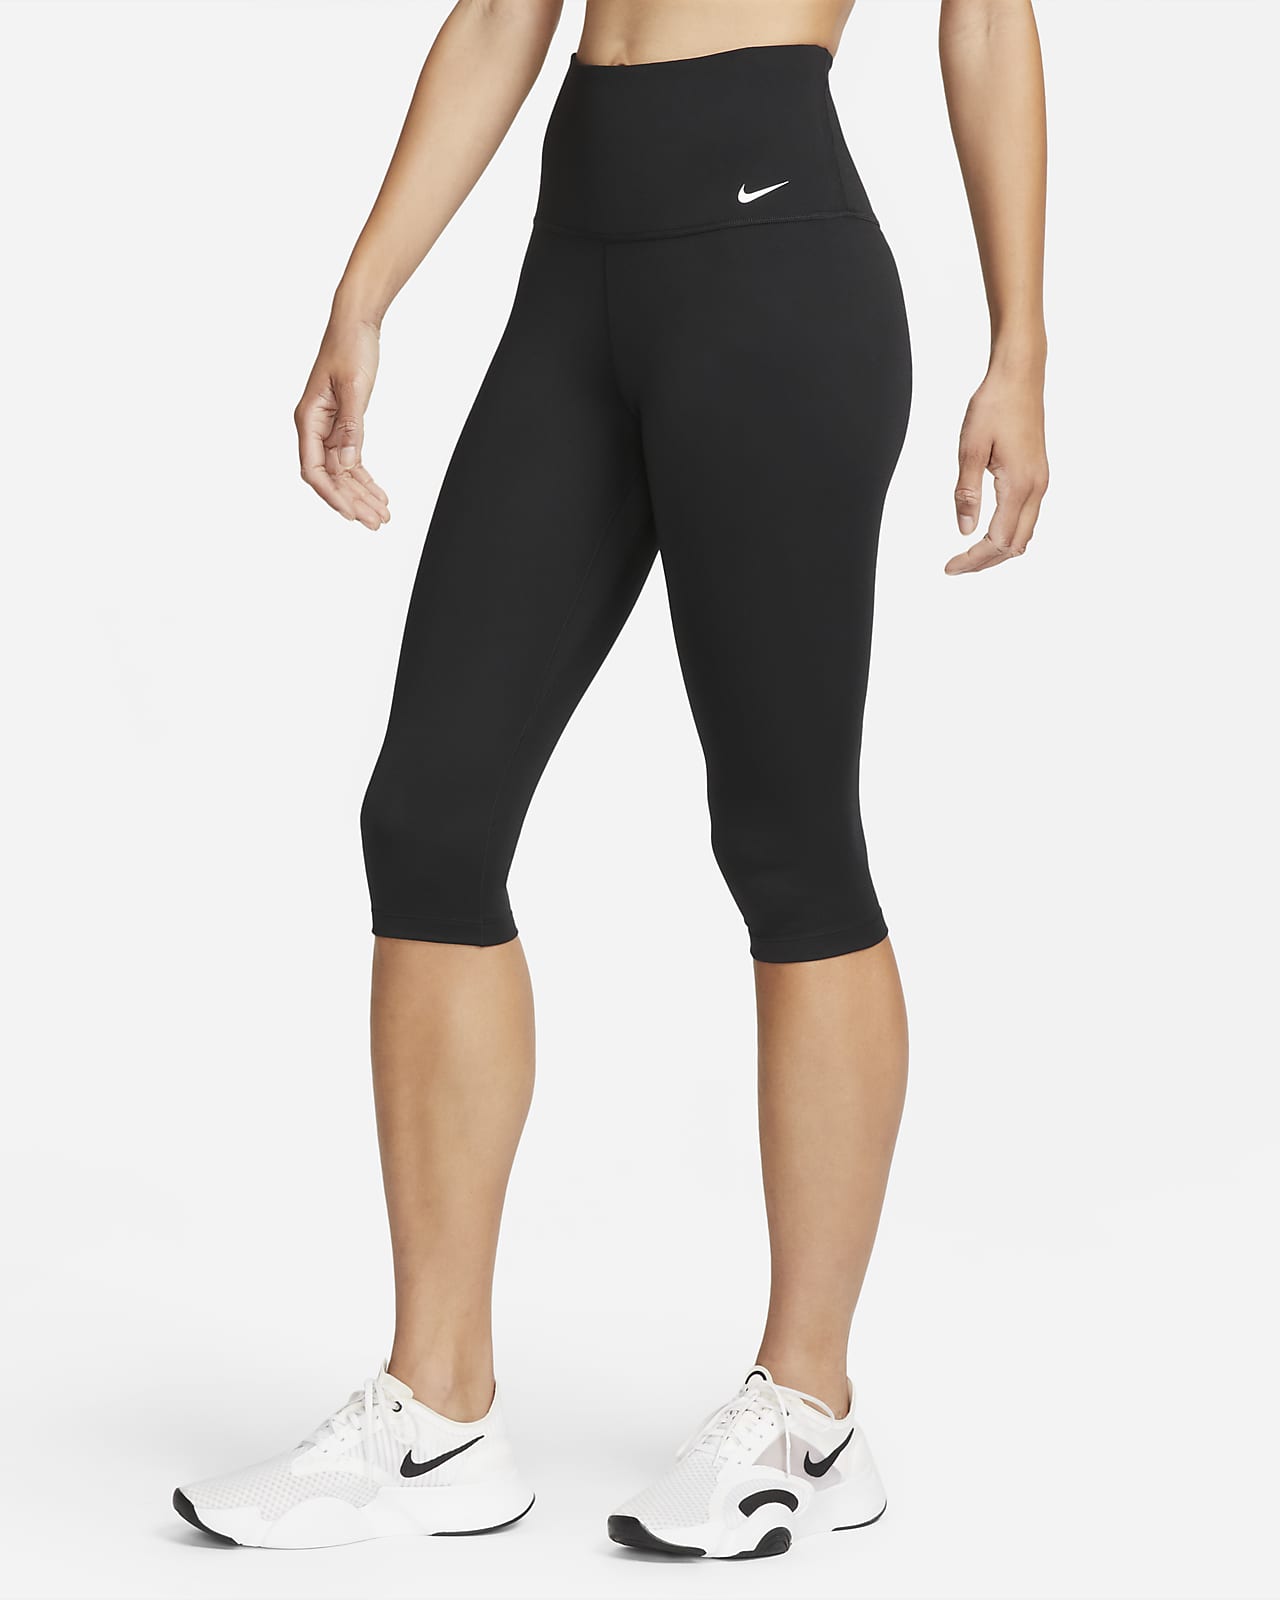 https://static.nike.com/a/images/t_PDP_1280_v1/f_auto,q_auto:eco/bb1c8b14-1caa-4f56-8a82-d5411d5d74ae/one-caprilegging-met-hoge-taille-dames-dQcGCZ.png